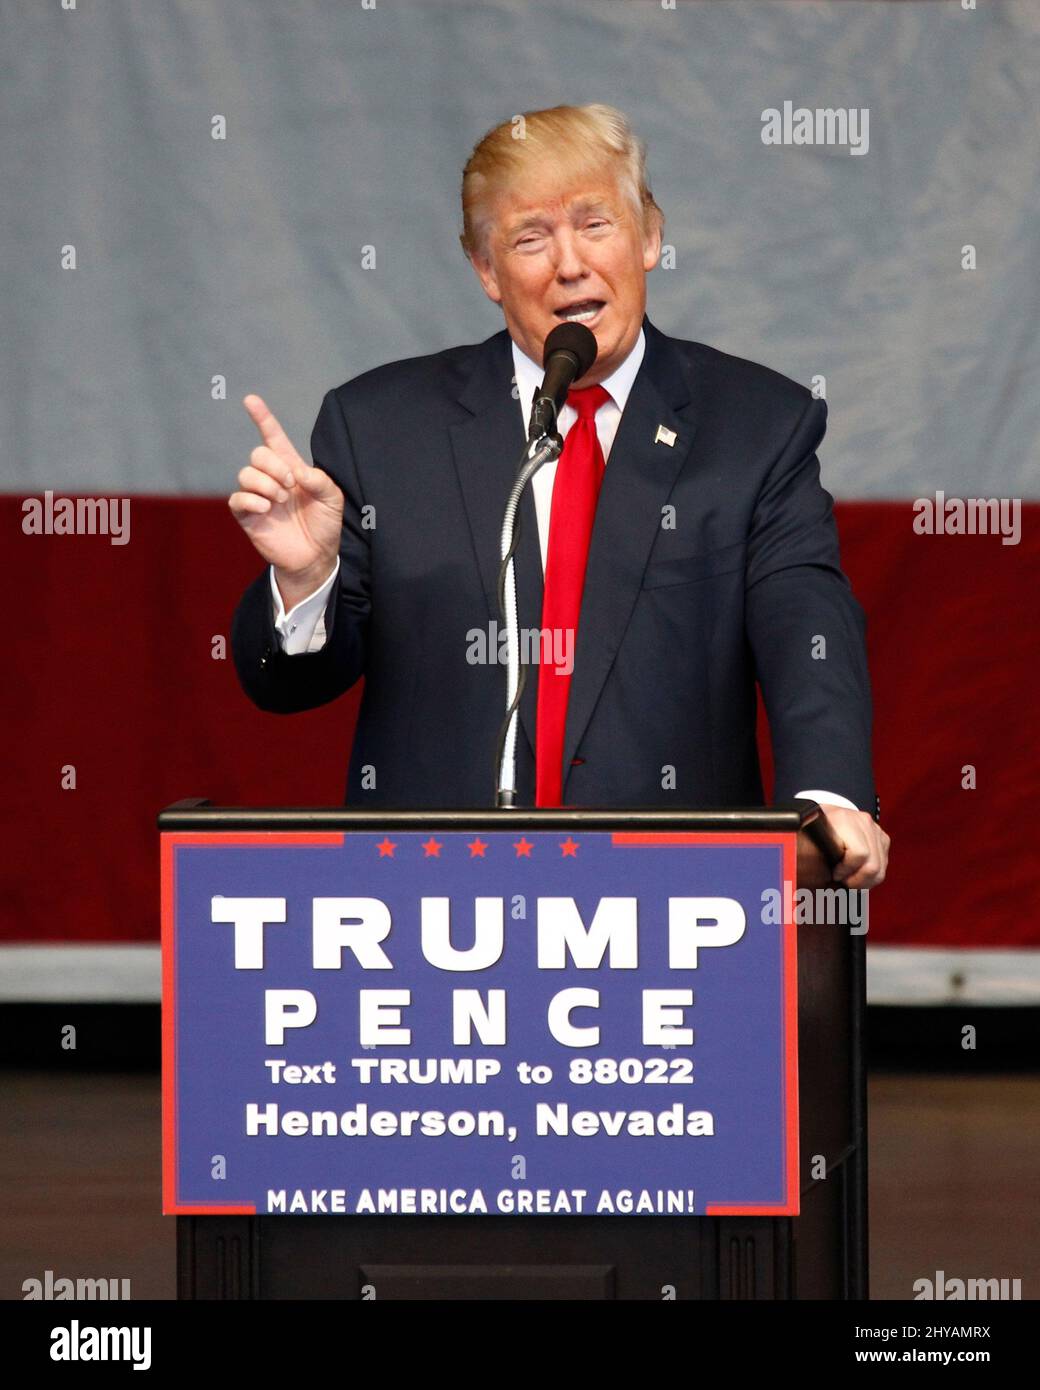 Donald Trump Republican Presidential candidate Donald Trump addresses supporters during a rally at the Henderson Pavilion Stock Photo